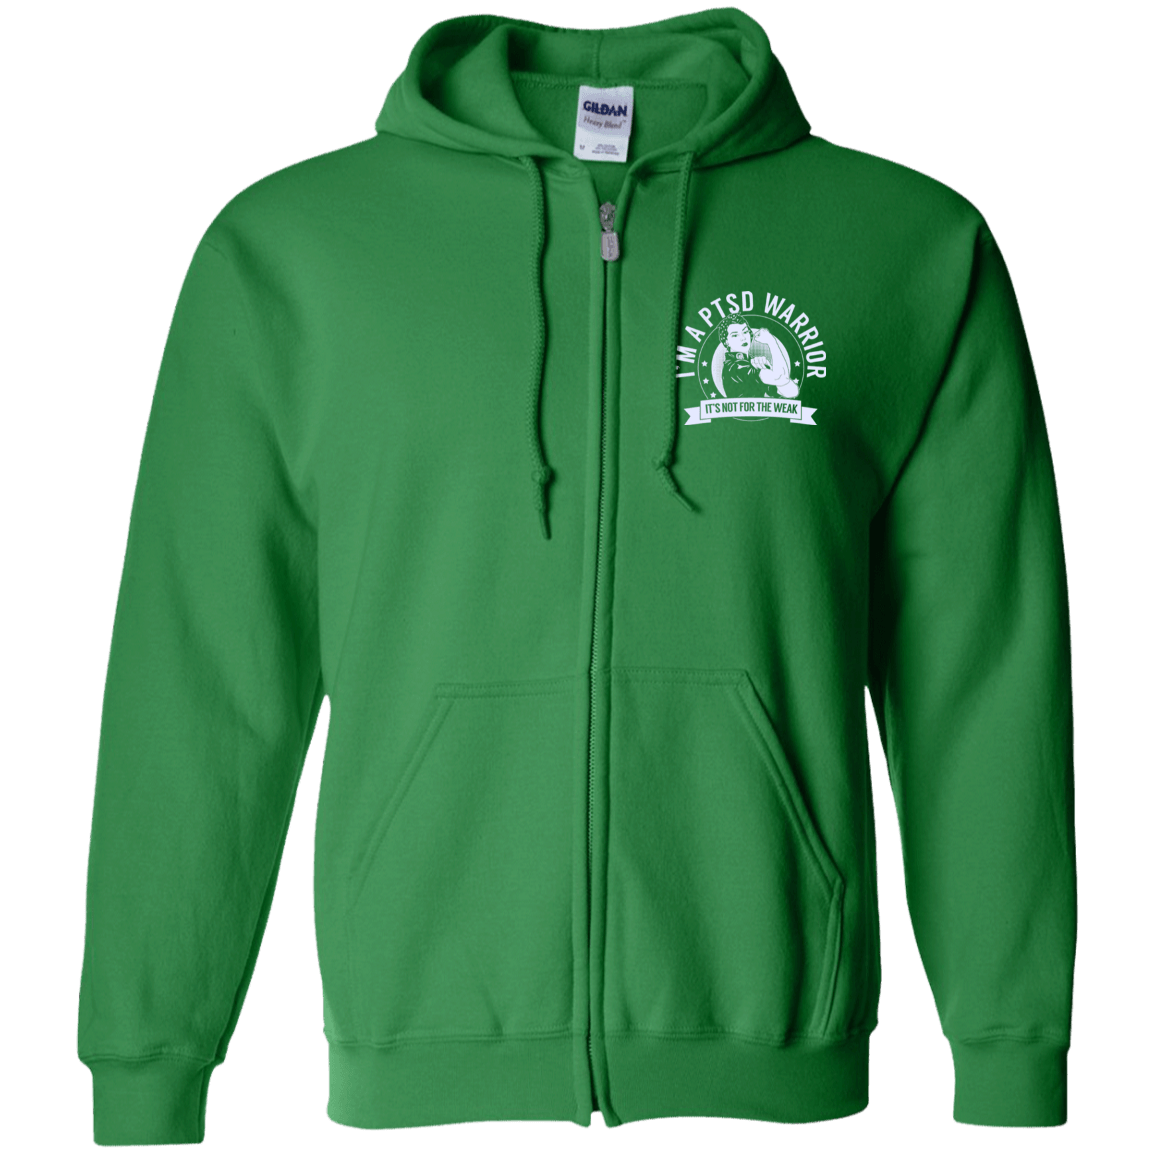 Post Traumatic Stress Disorder - PTSD Warrior NFTW Zip Up Hooded Sweatshirt - The Unchargeables